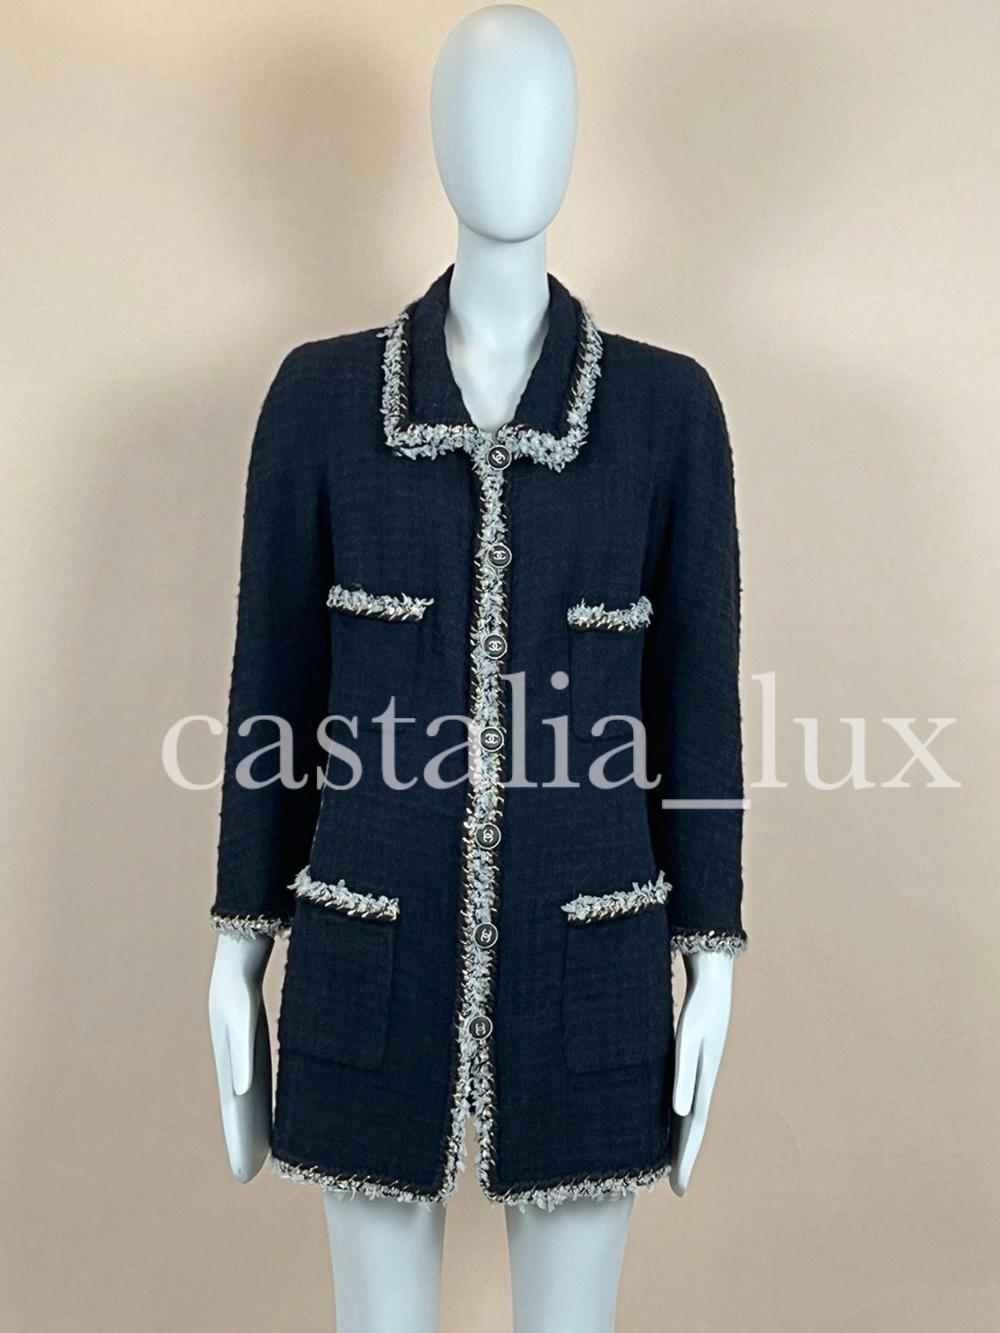 Chanel New Chain Link Trim Black Tweed Jacket In New Condition For Sale In Dubai, AE